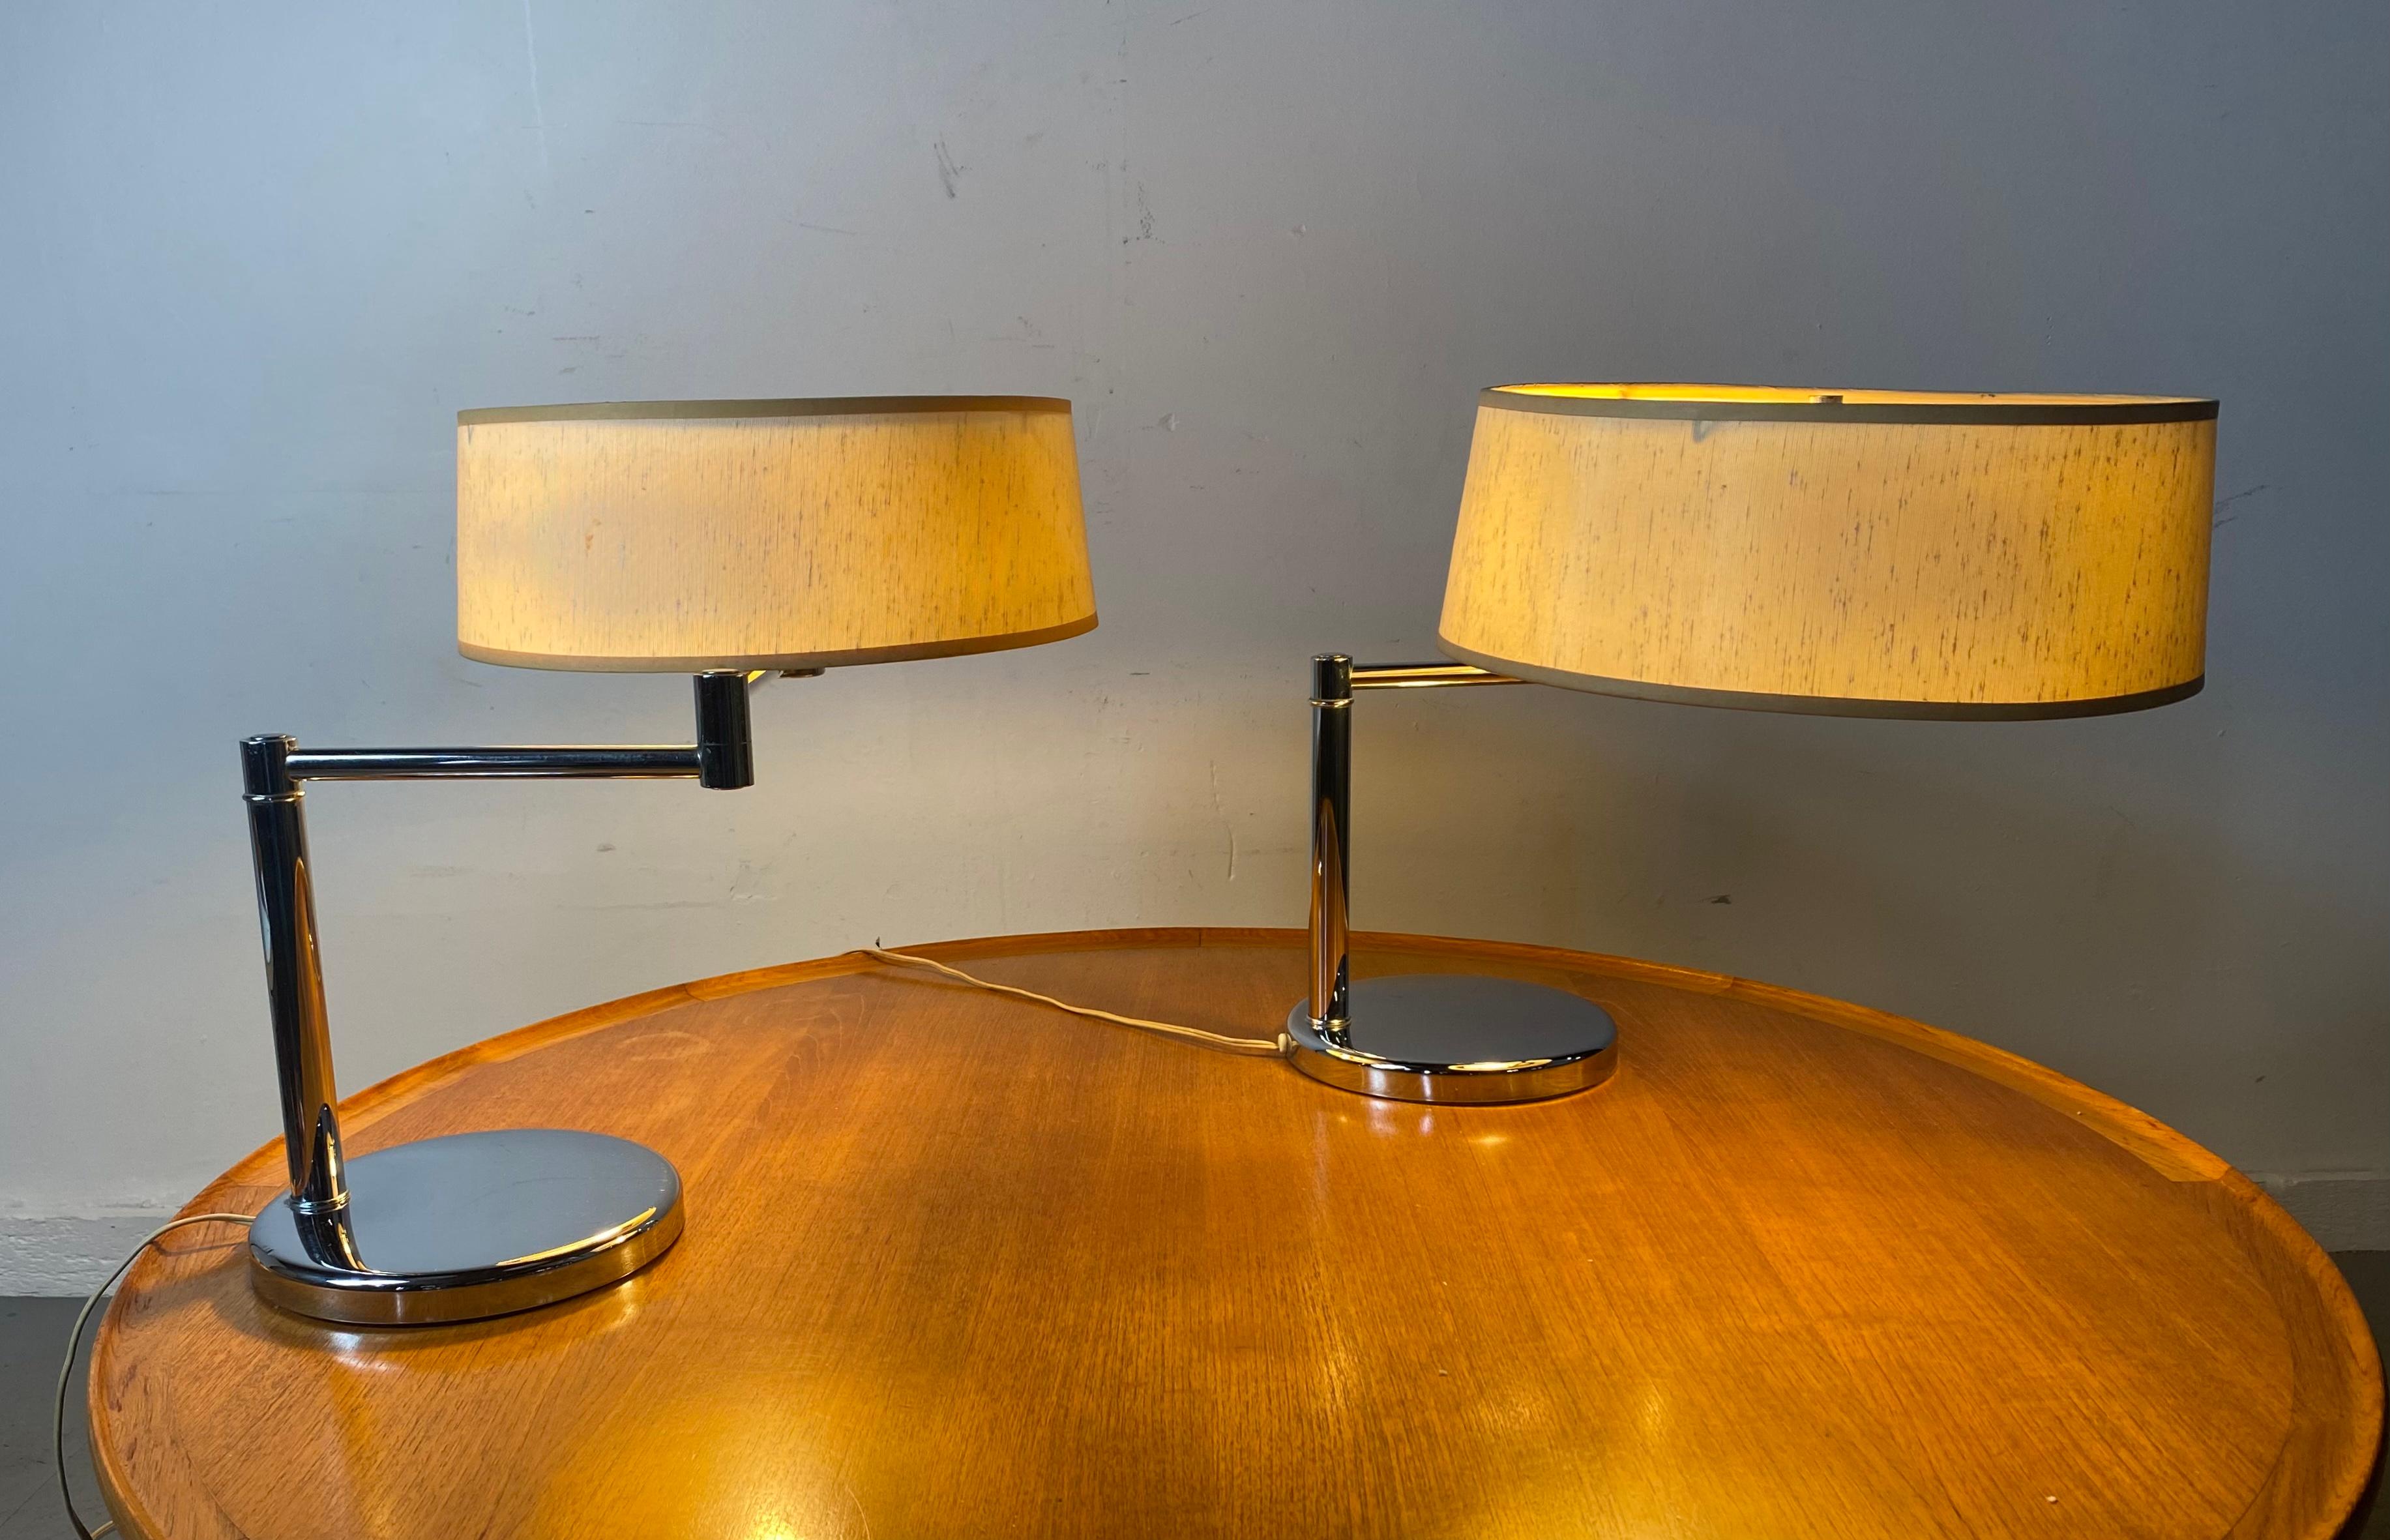 Matched Pair Walter Von Nessen Swing Out Table/ Desk Lamps, Nessen Studio's 3